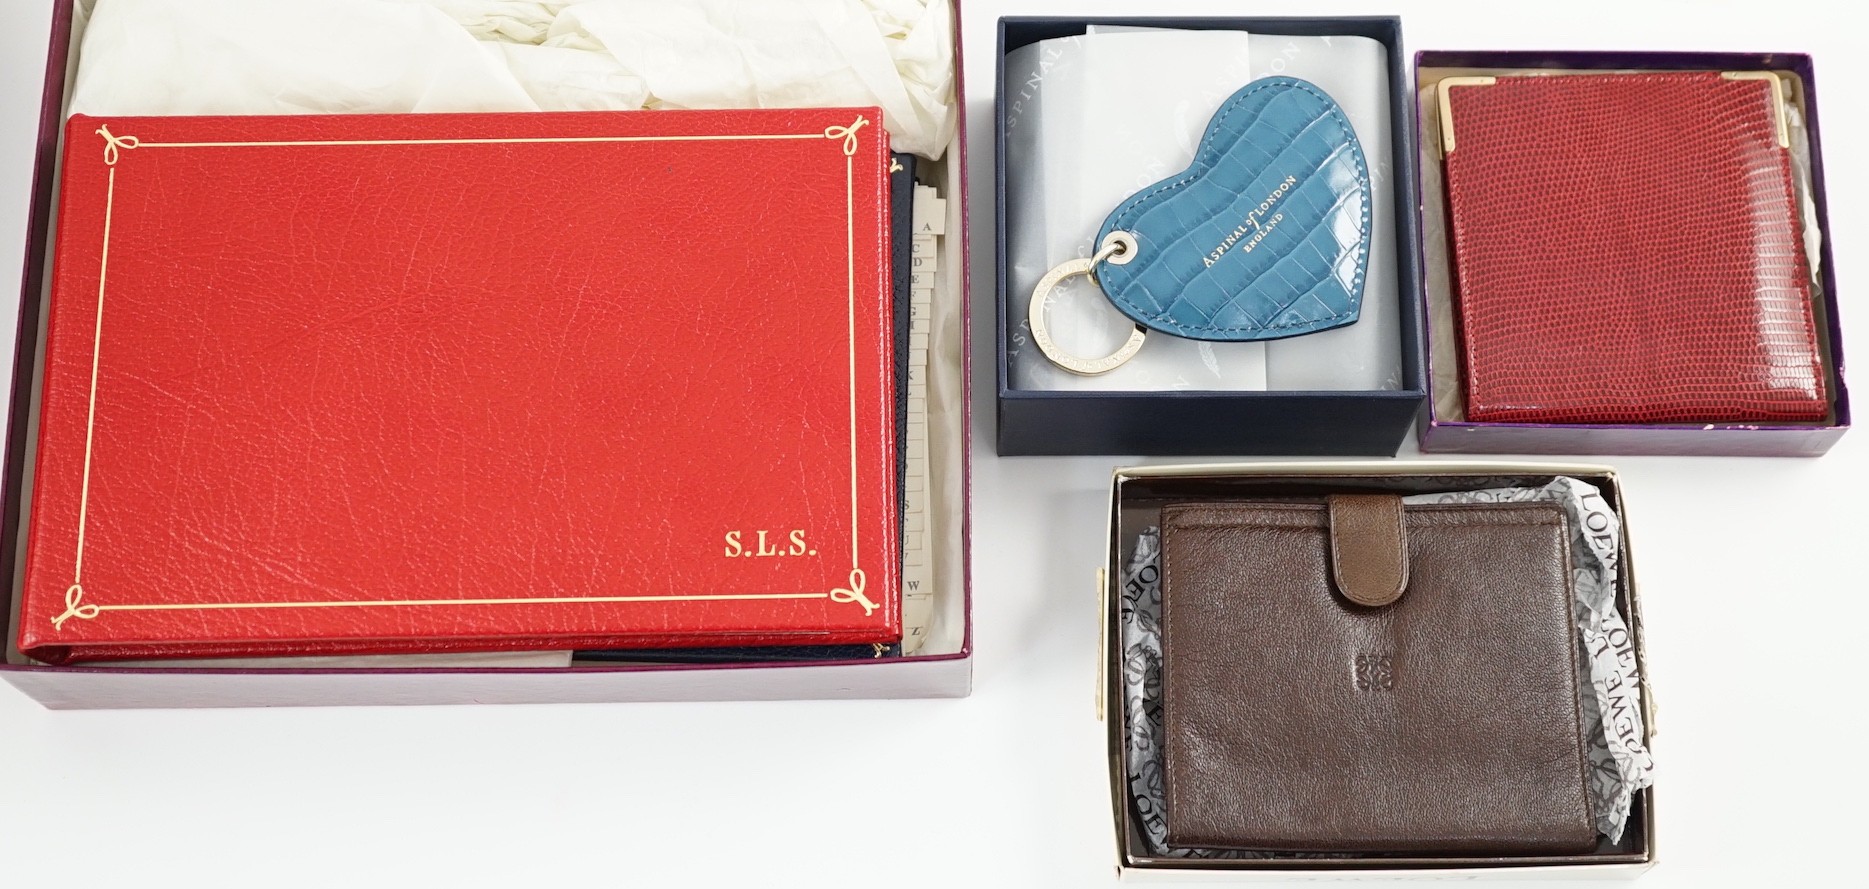 A set of two Asprey leather address books (initialled), an Asprey snakeskin wallet, a Loewe brown leather wallet and an Aspinal heart key fob